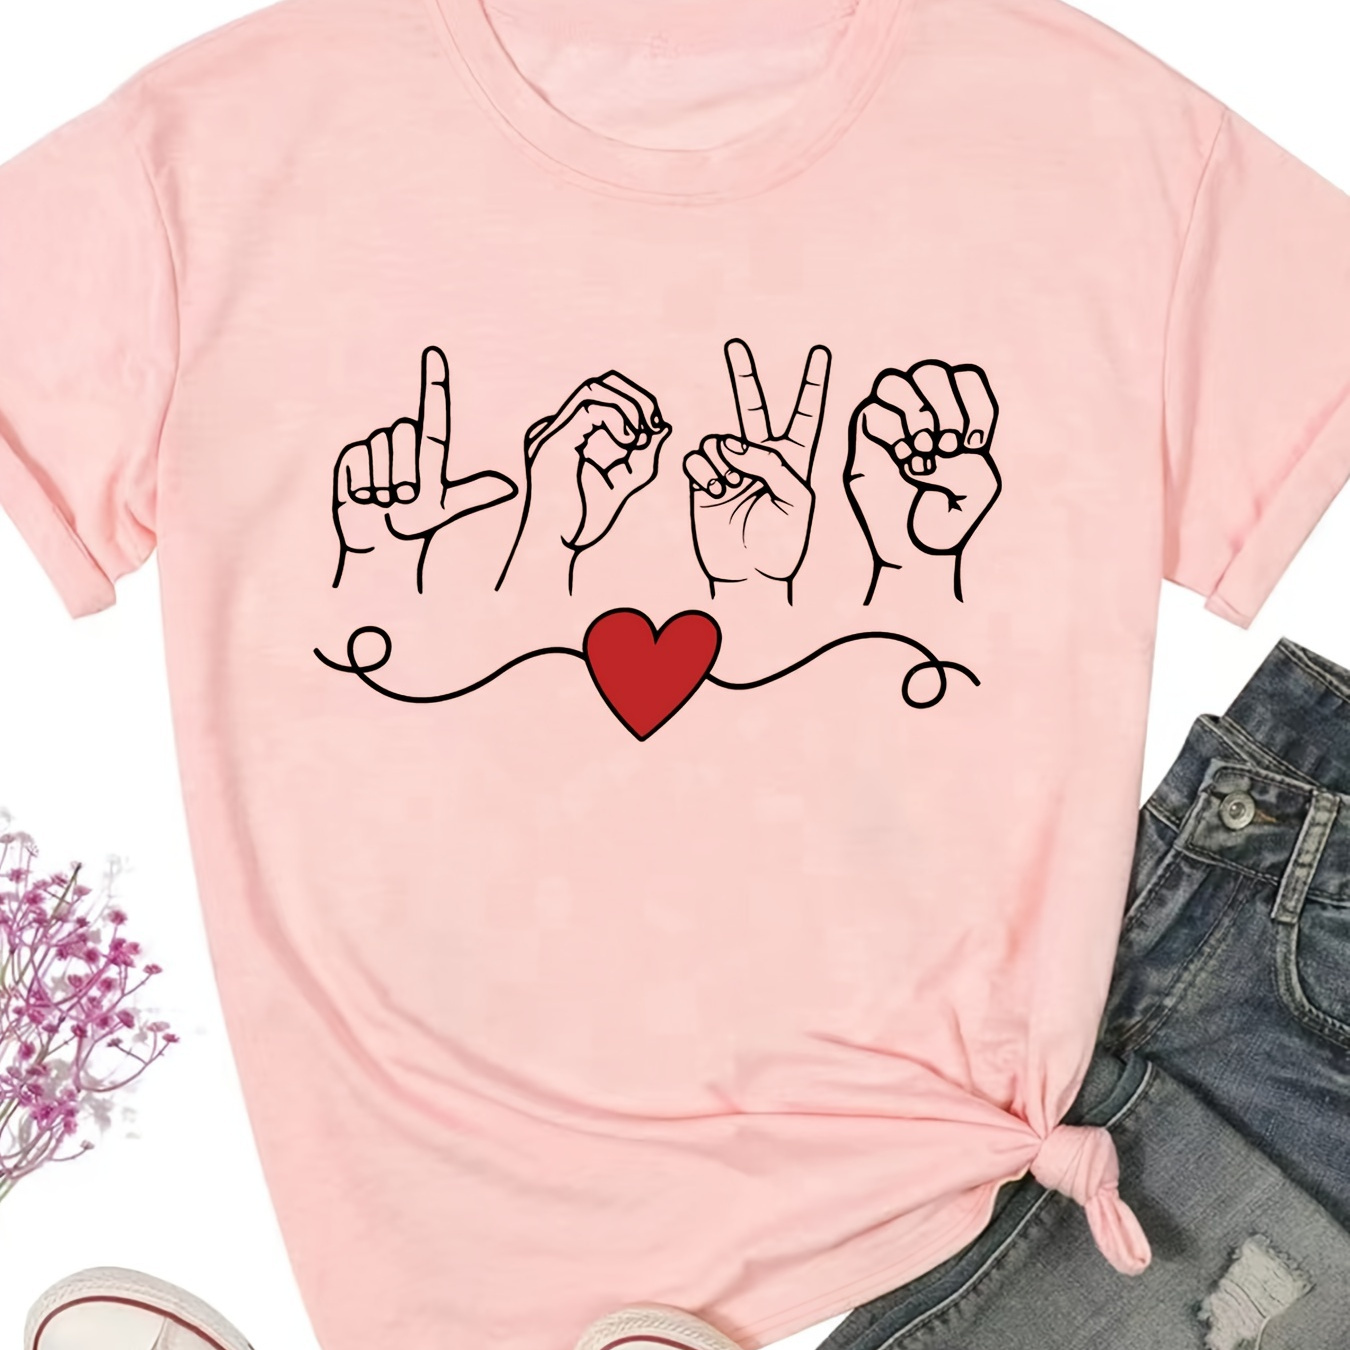 

Heart & Gesture Print Crew Neck T-shirt, Casual Short Sleeve T-shirt For Spring & Summer, Women's Clothing, Valentine's Day